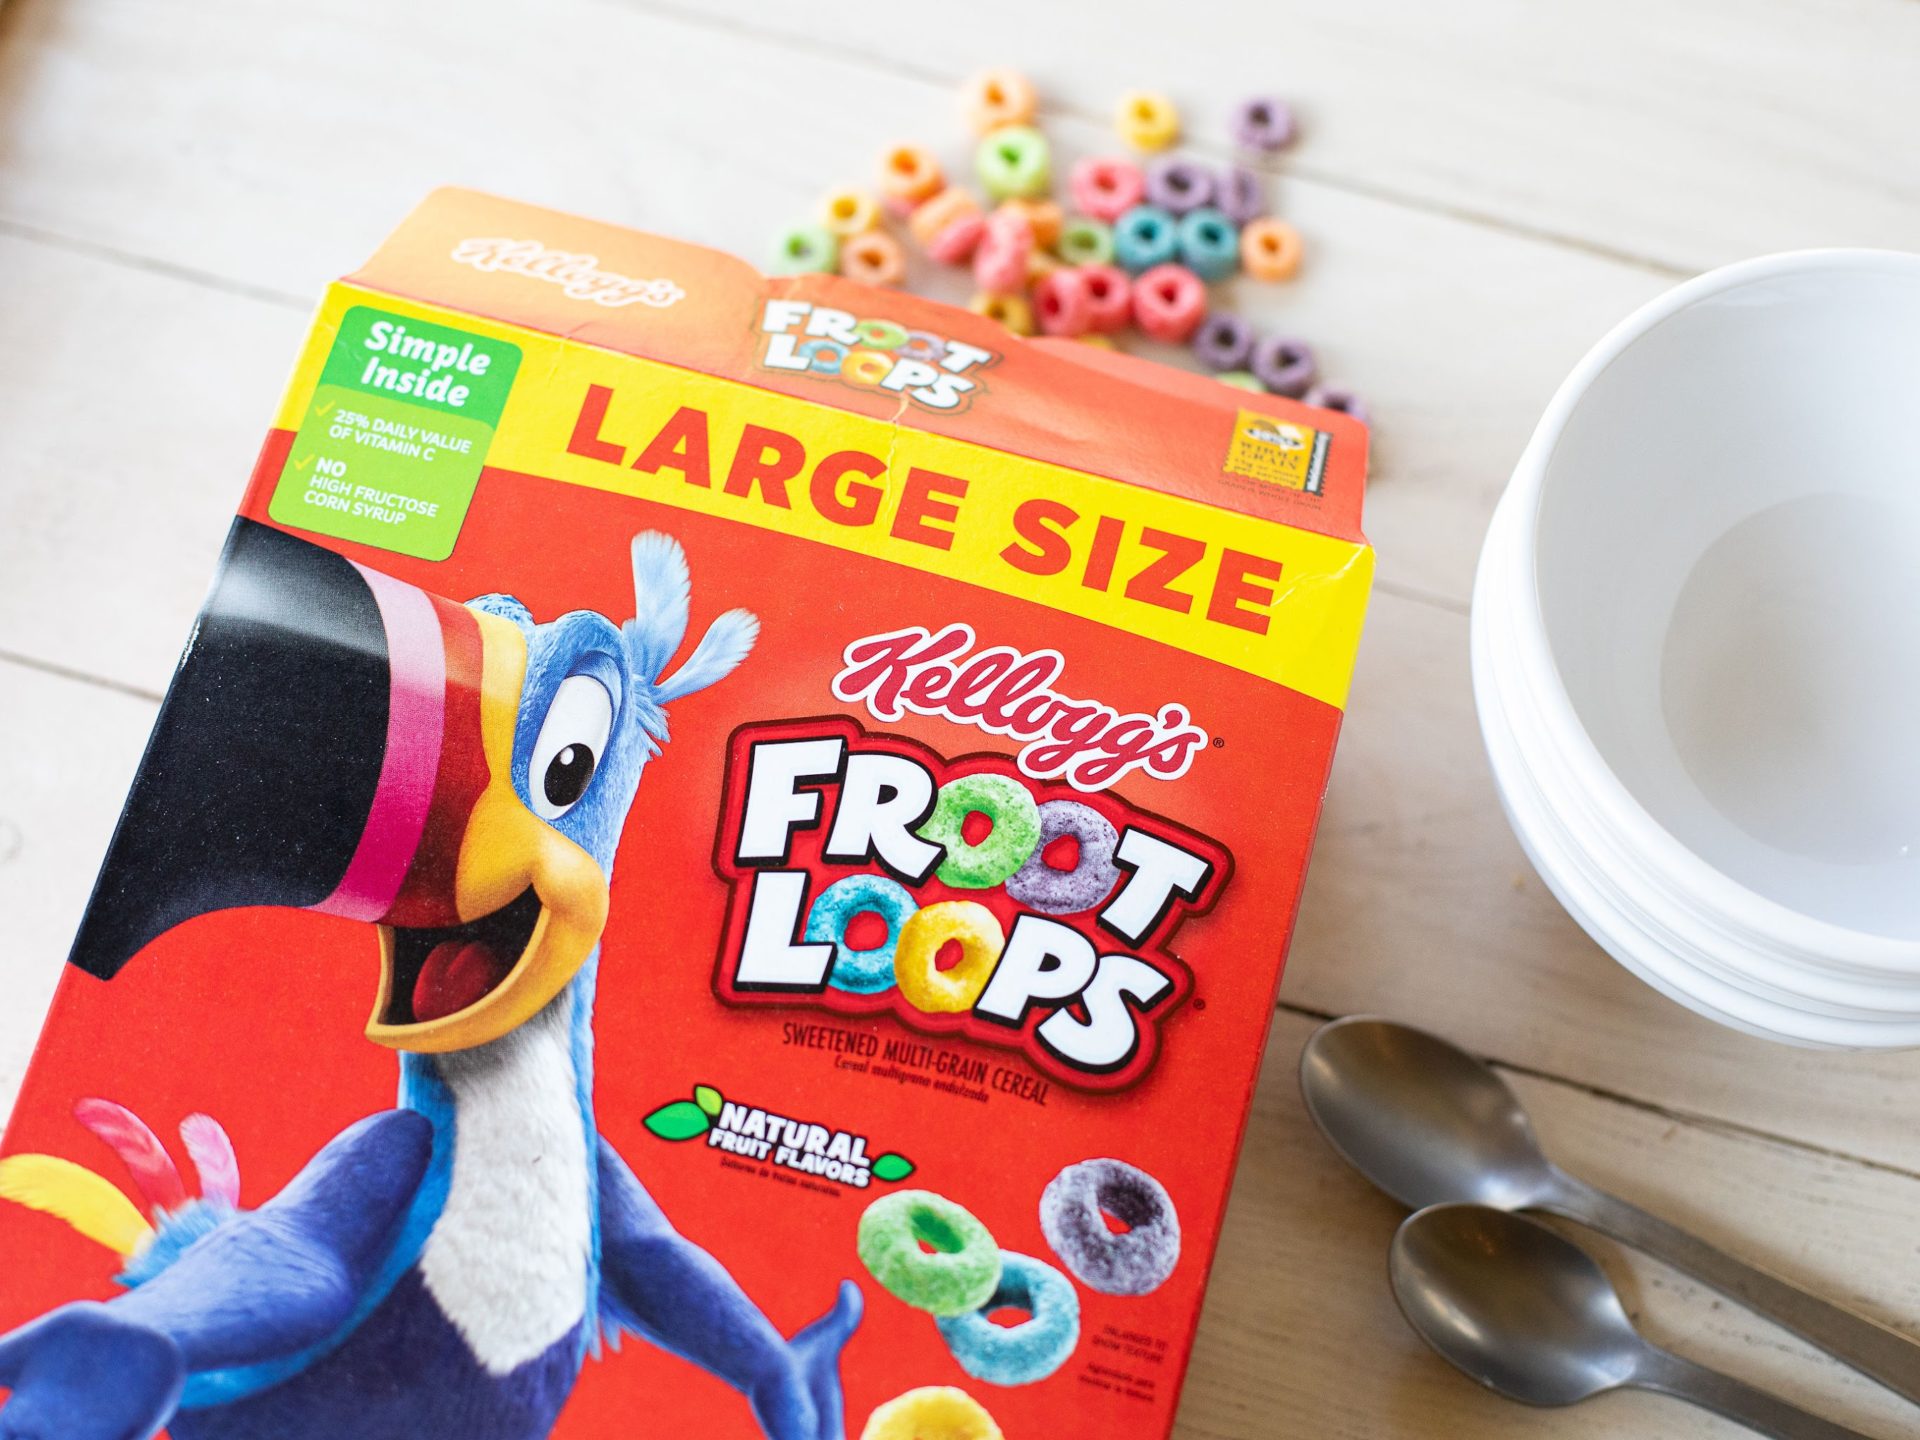 Kellogg’s Large Size Boxes Of Cereal Just $2.49 At Kroger